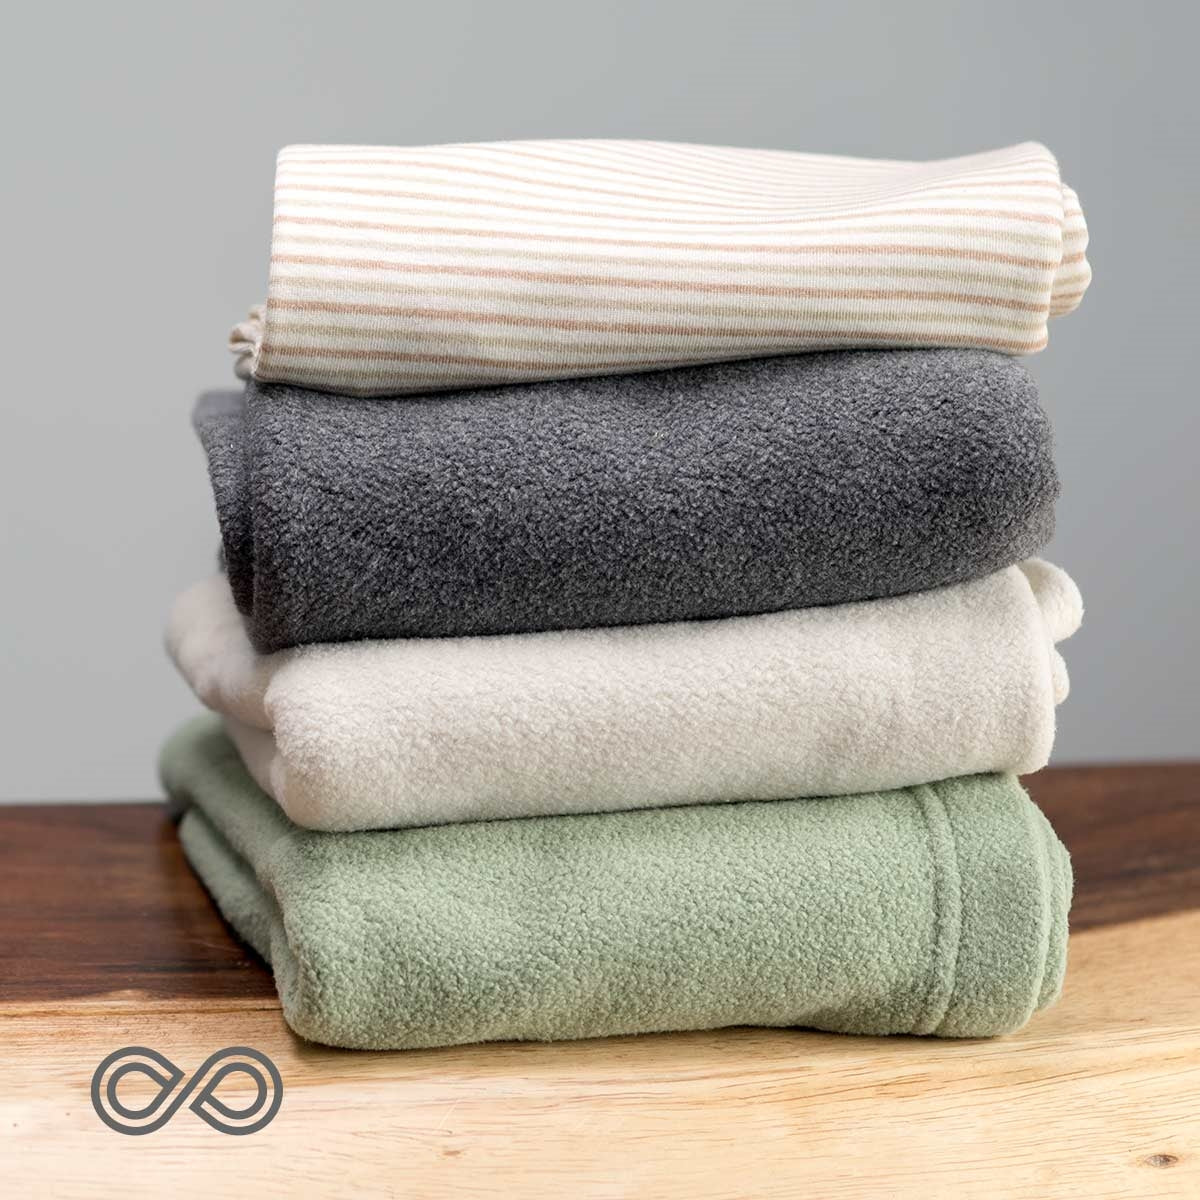 Eco Friendly USA Grown 100 Organic Cotton Fleece Blankets By Rawganique Since 1997 Made In House In Europe For Sweatshop Free Purity Ships Worldwide